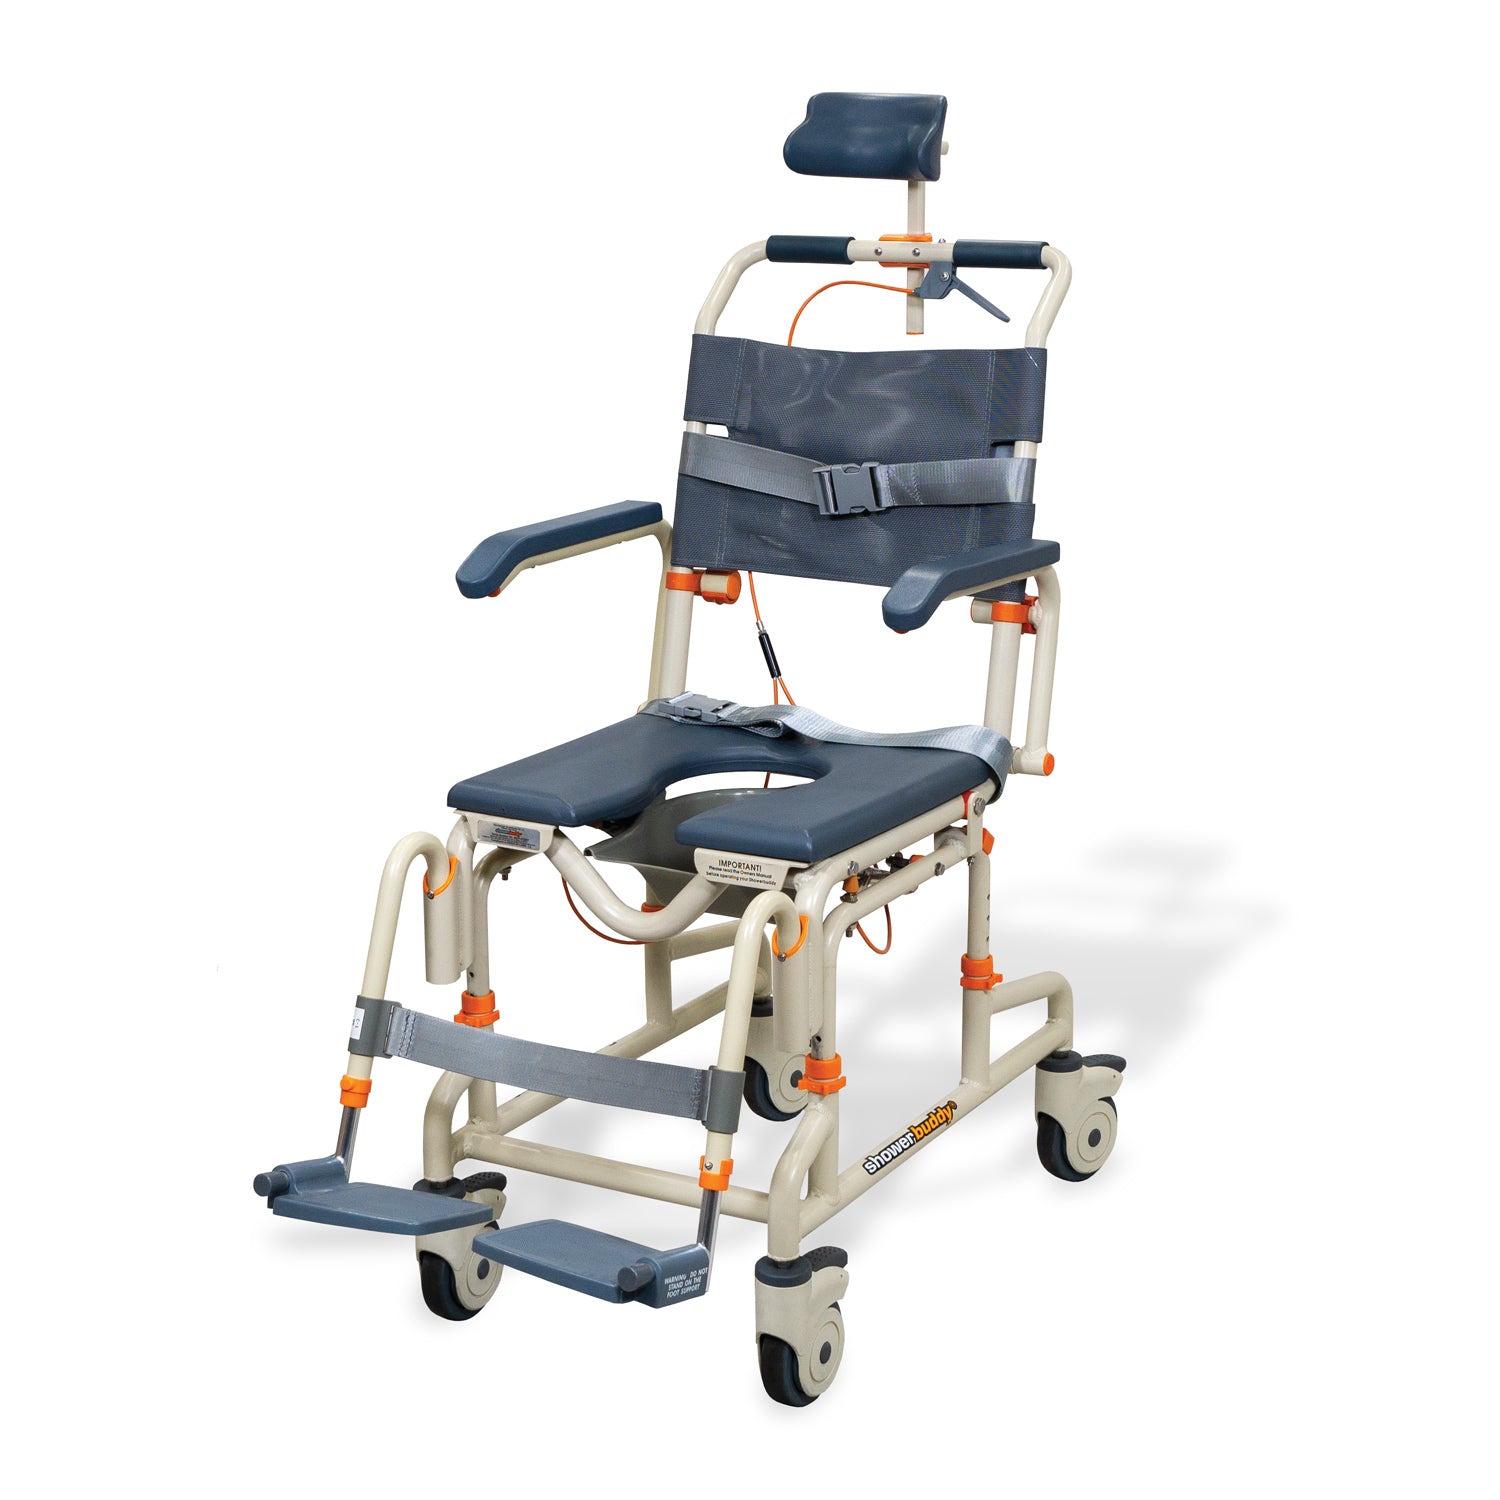 ShowerBuddy SB3T Roll-In Shower Chair with Tilt